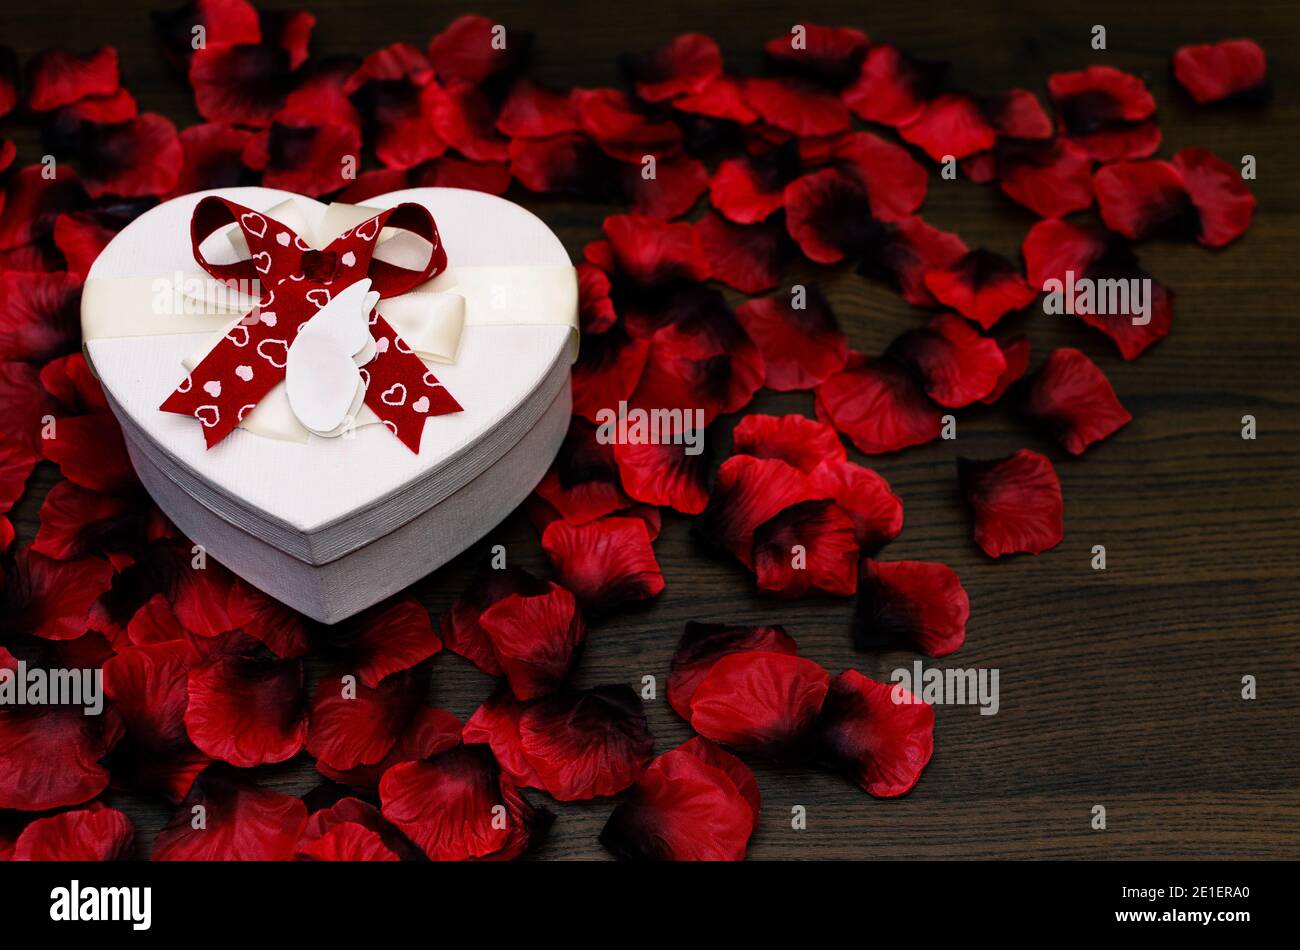 Heart shaped gift box on red roses petals and wooden table as copy ...